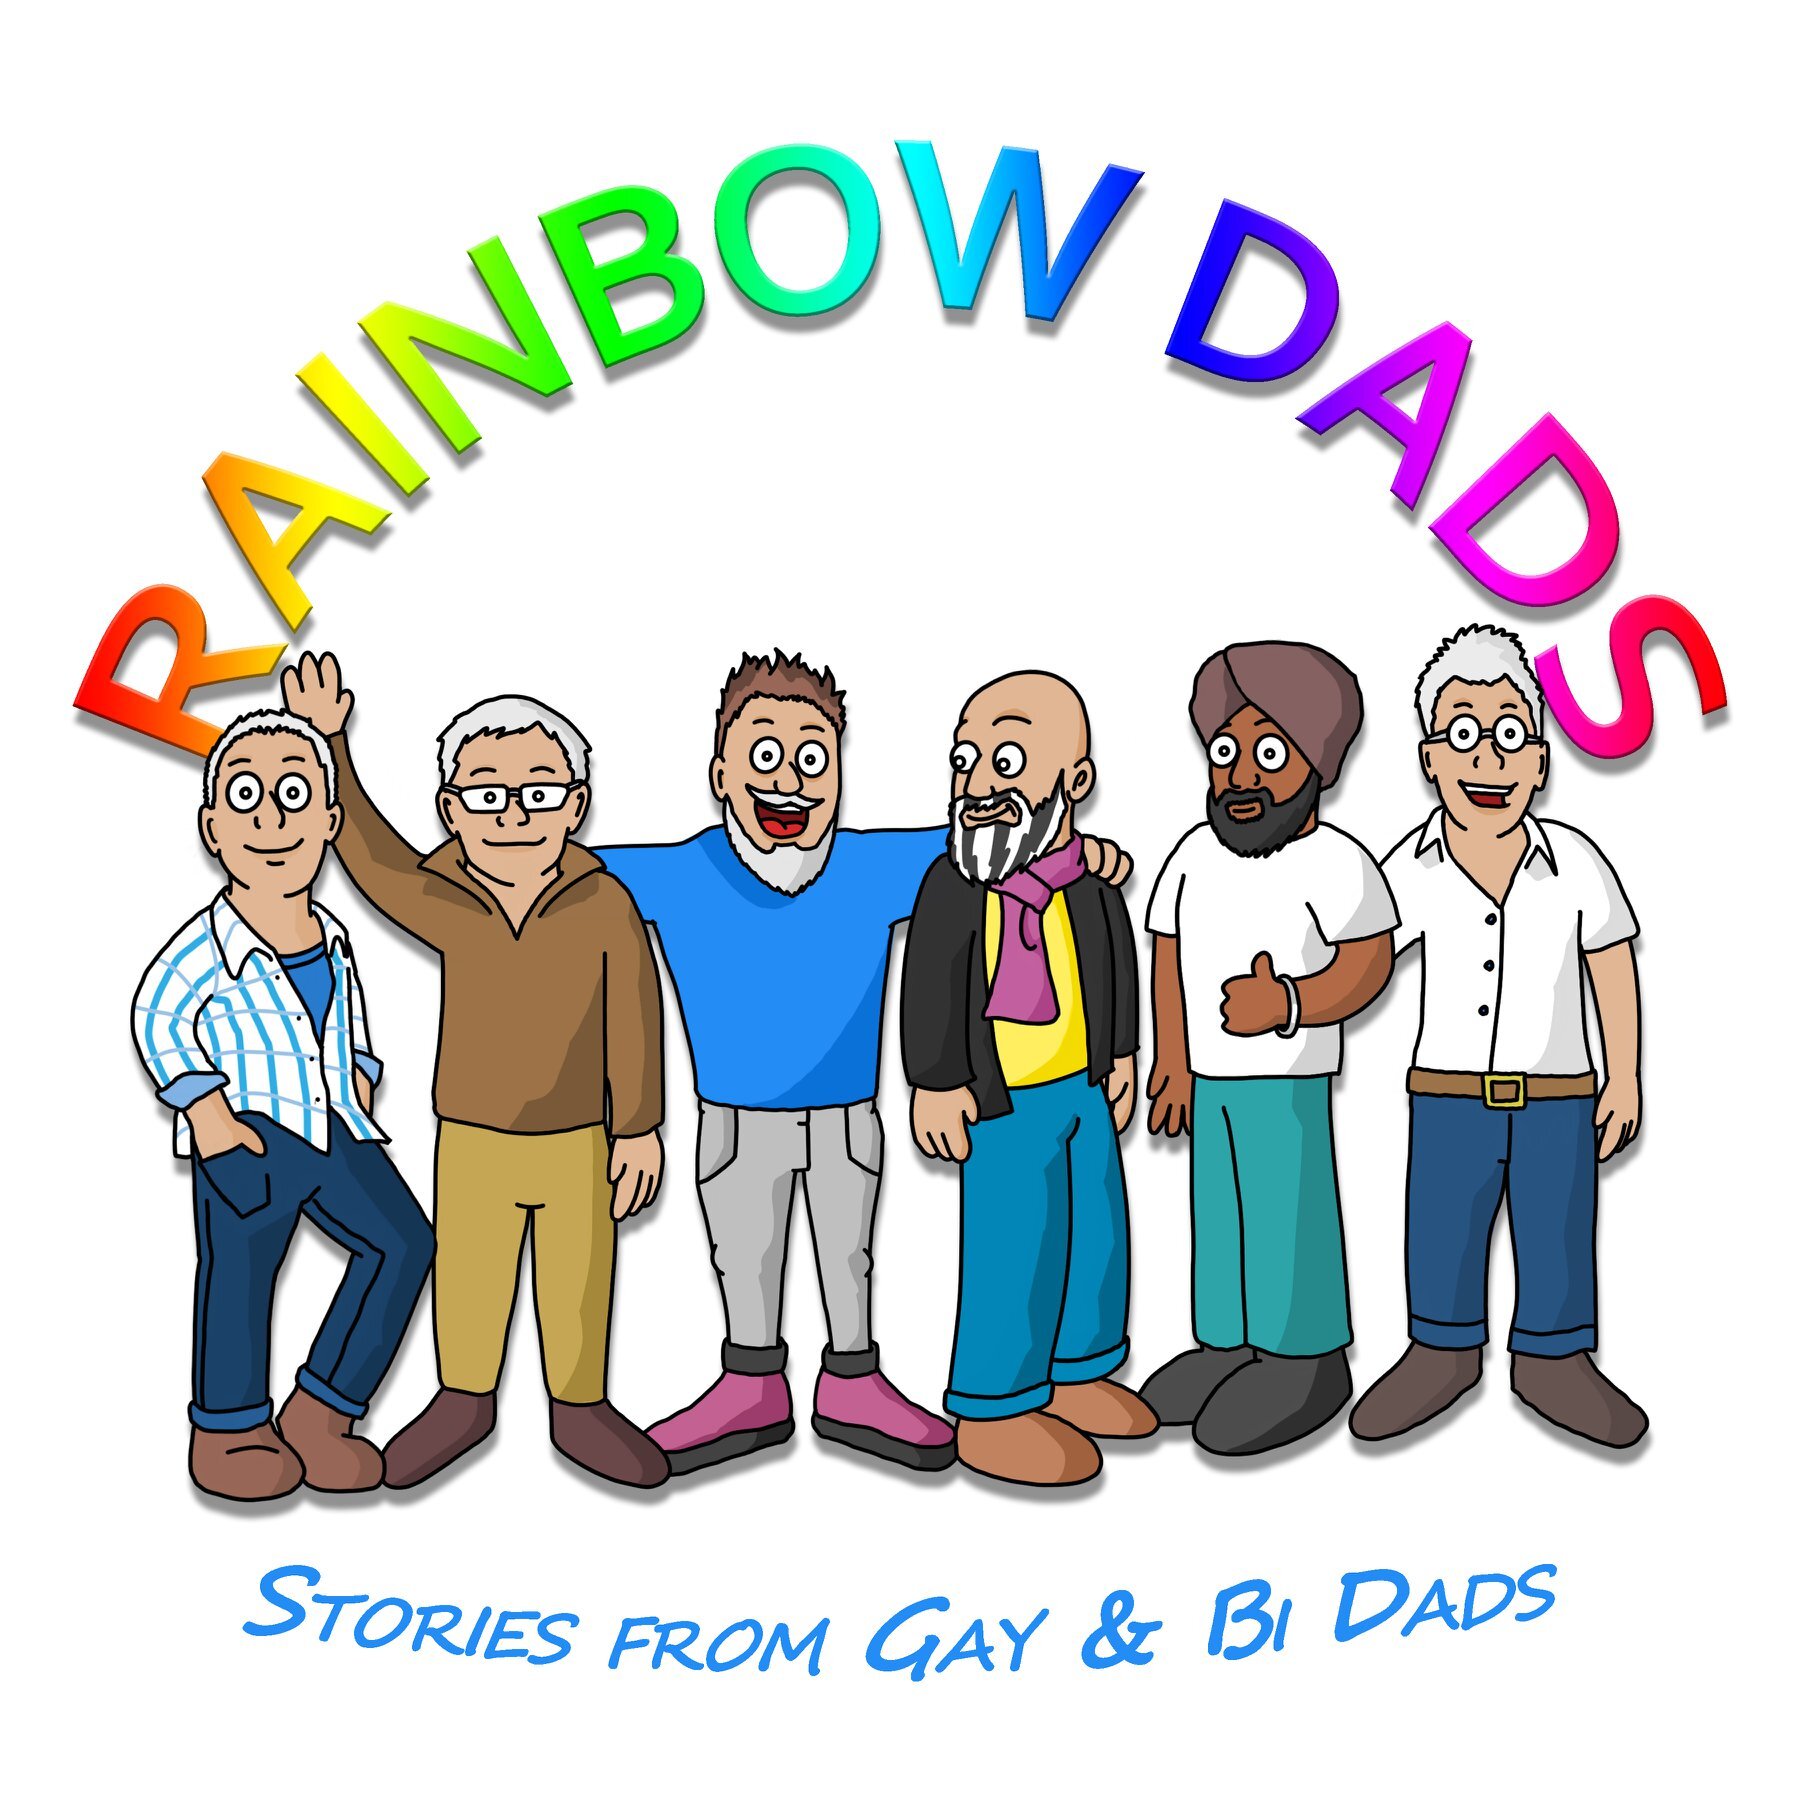 Rainbow Dads nominated for Best Wellbeing Podcast (British Podcast Awards)2020 header image 1